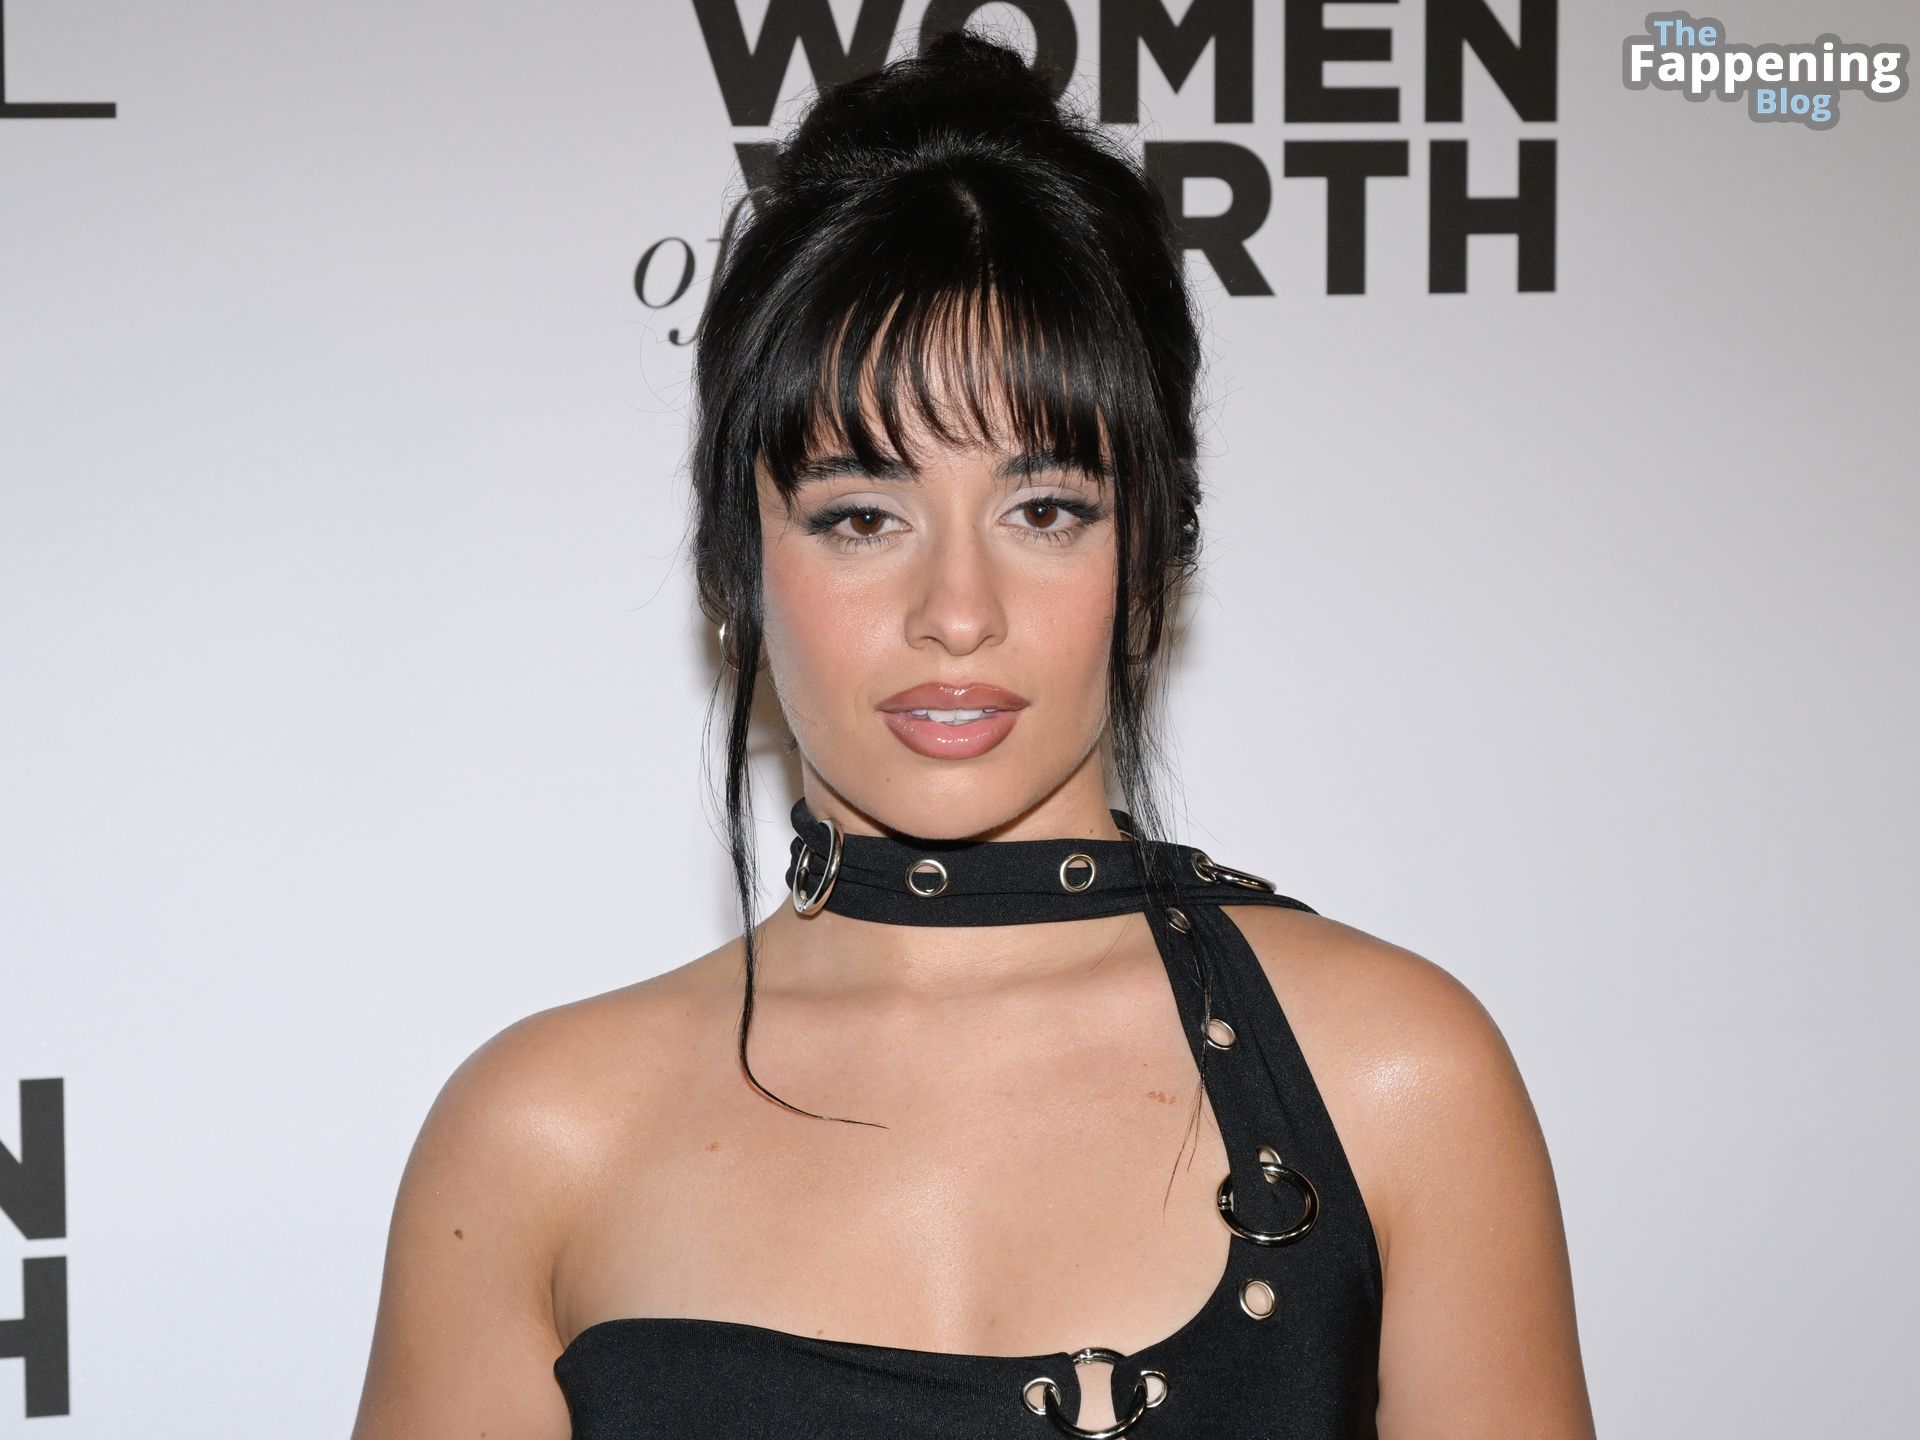 Camila Cabello Shows Off Her Sexy Figure in a Risky Dress at the 2023 L’Oréal Paris Women Of Worth Event (45 Photos)